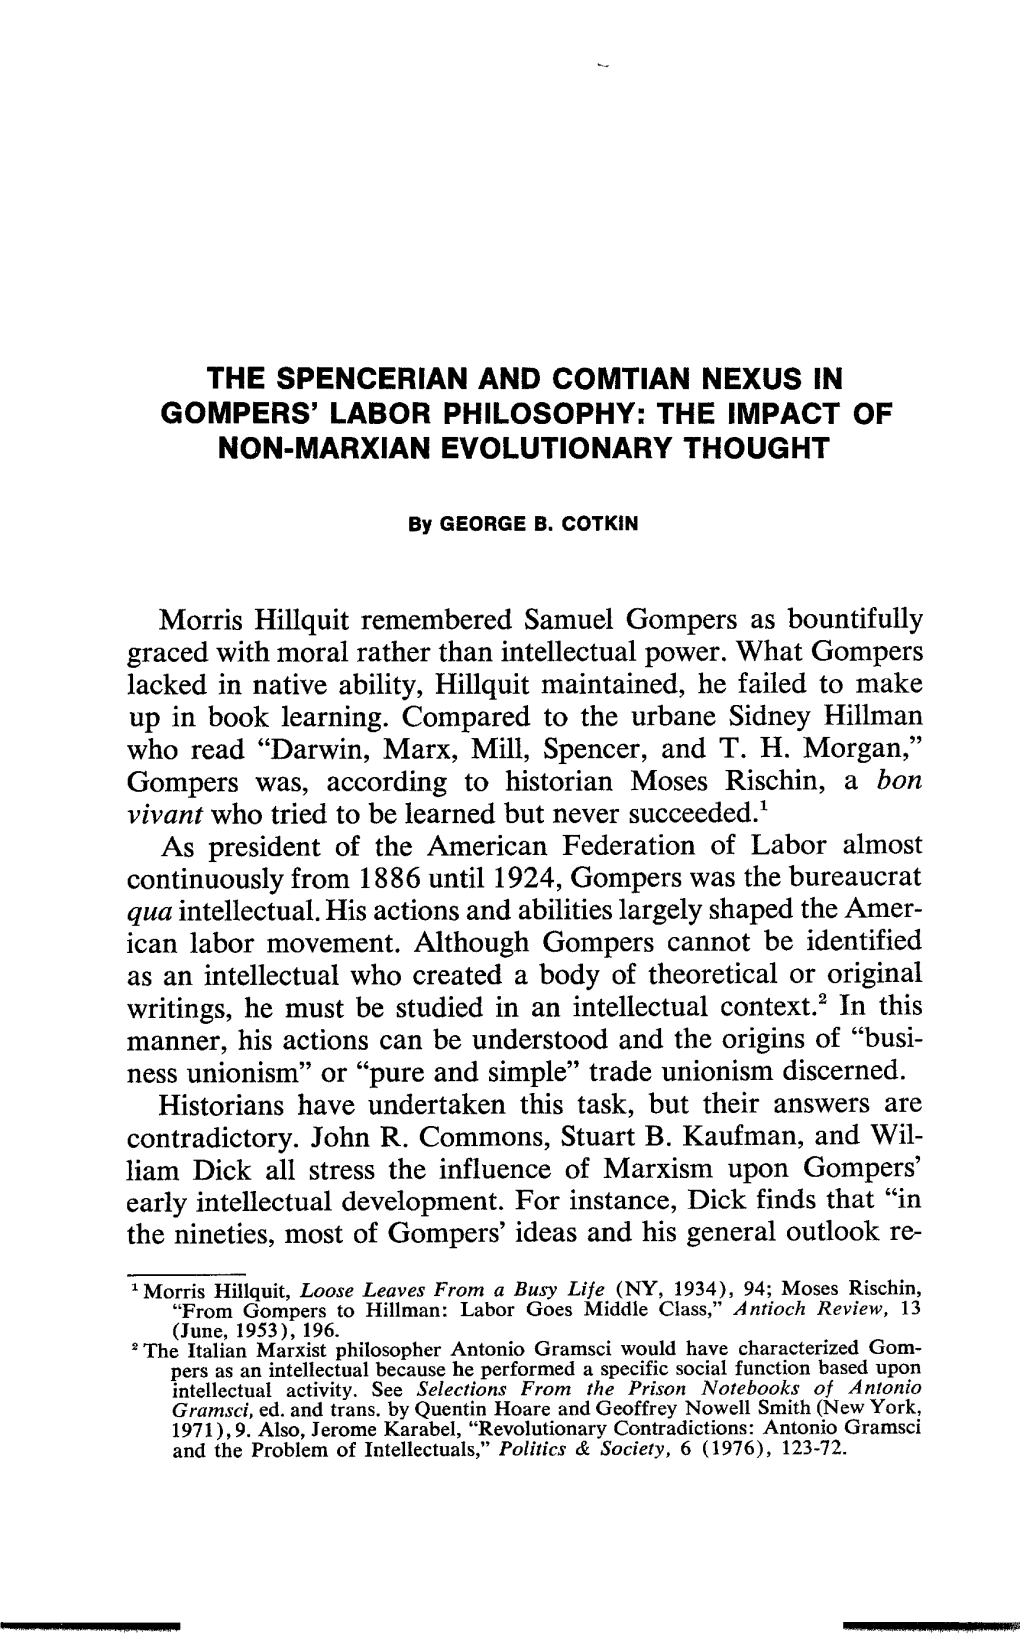 The Spencerian and Comtian Nexus in Gompers' Labor Philosophy: the Impact of Non-Marxian Evolutionary Thought